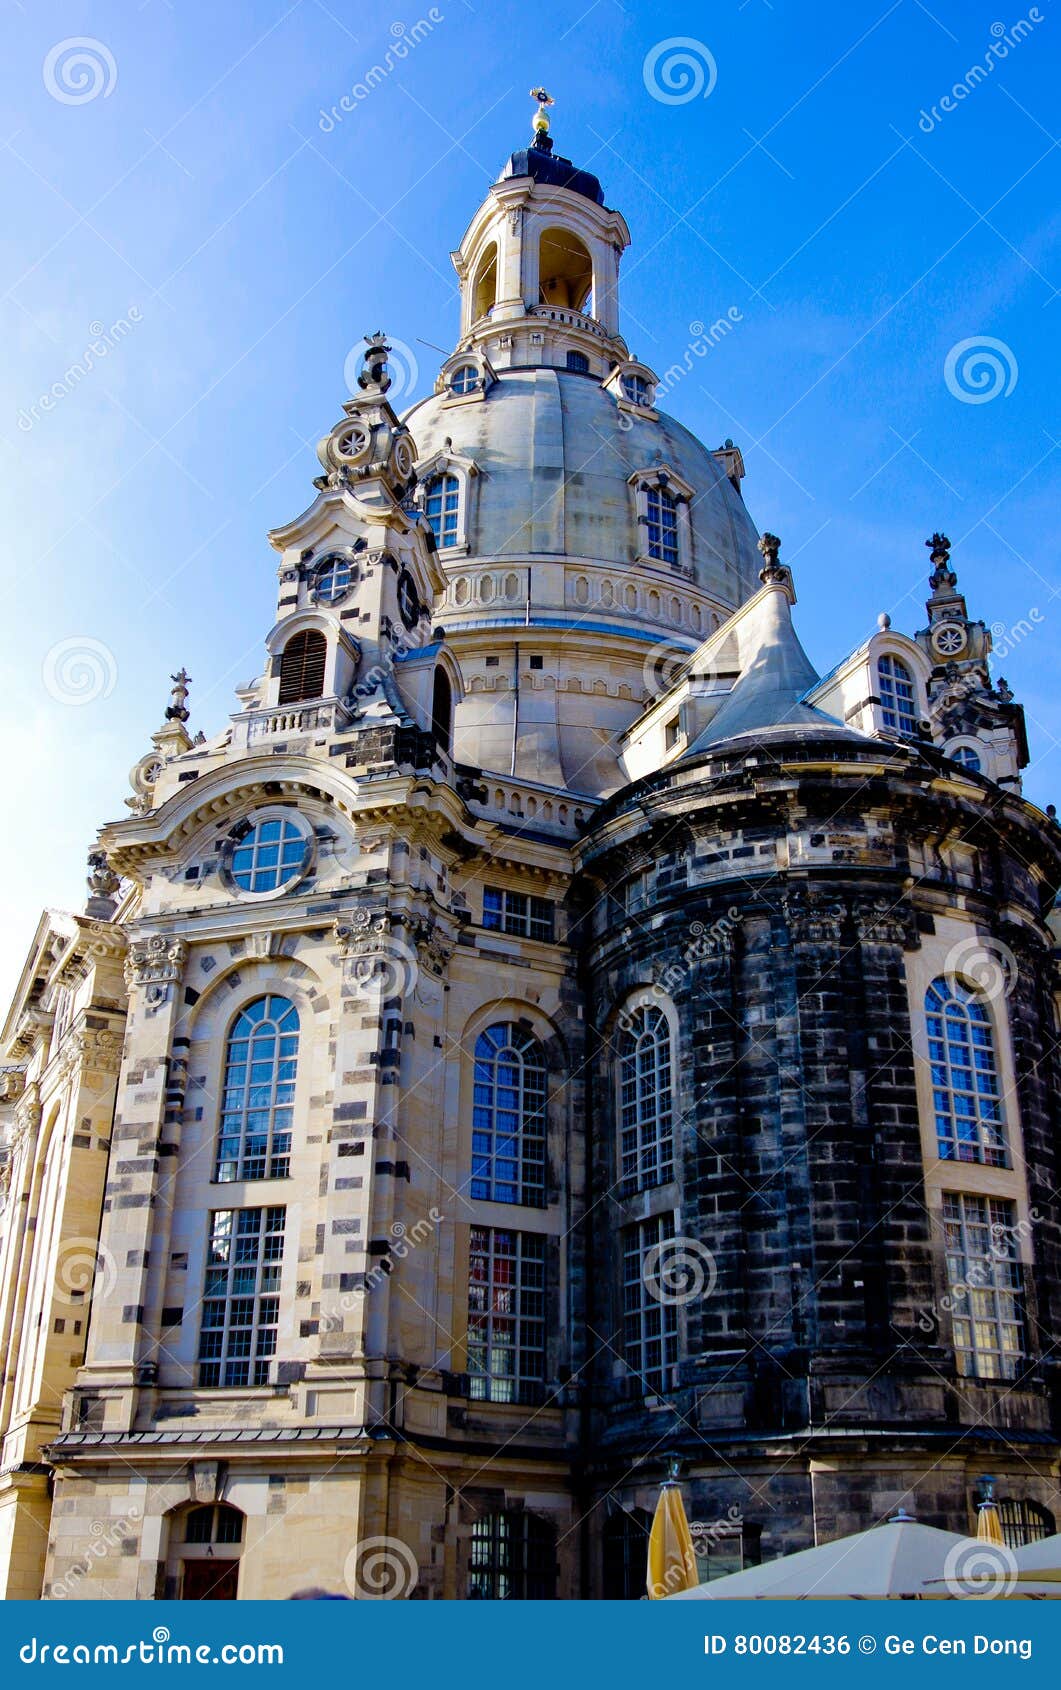 Closer View Of Frauen Kirch In Dresden Germany Stock Photo - 